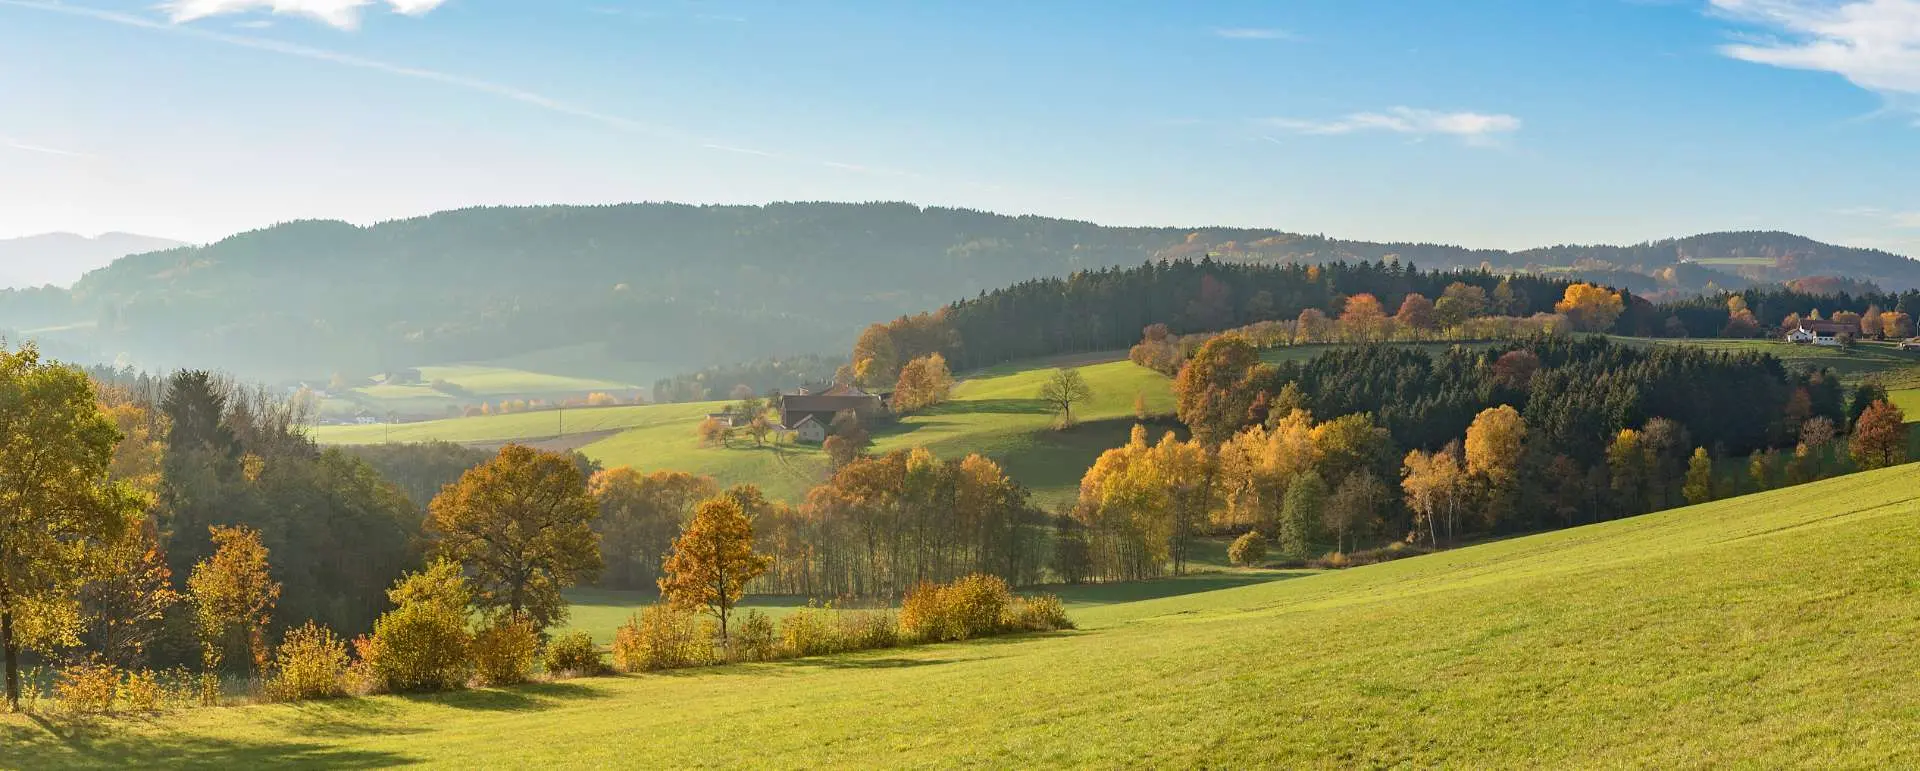 Lower Bavaria - the destination for students